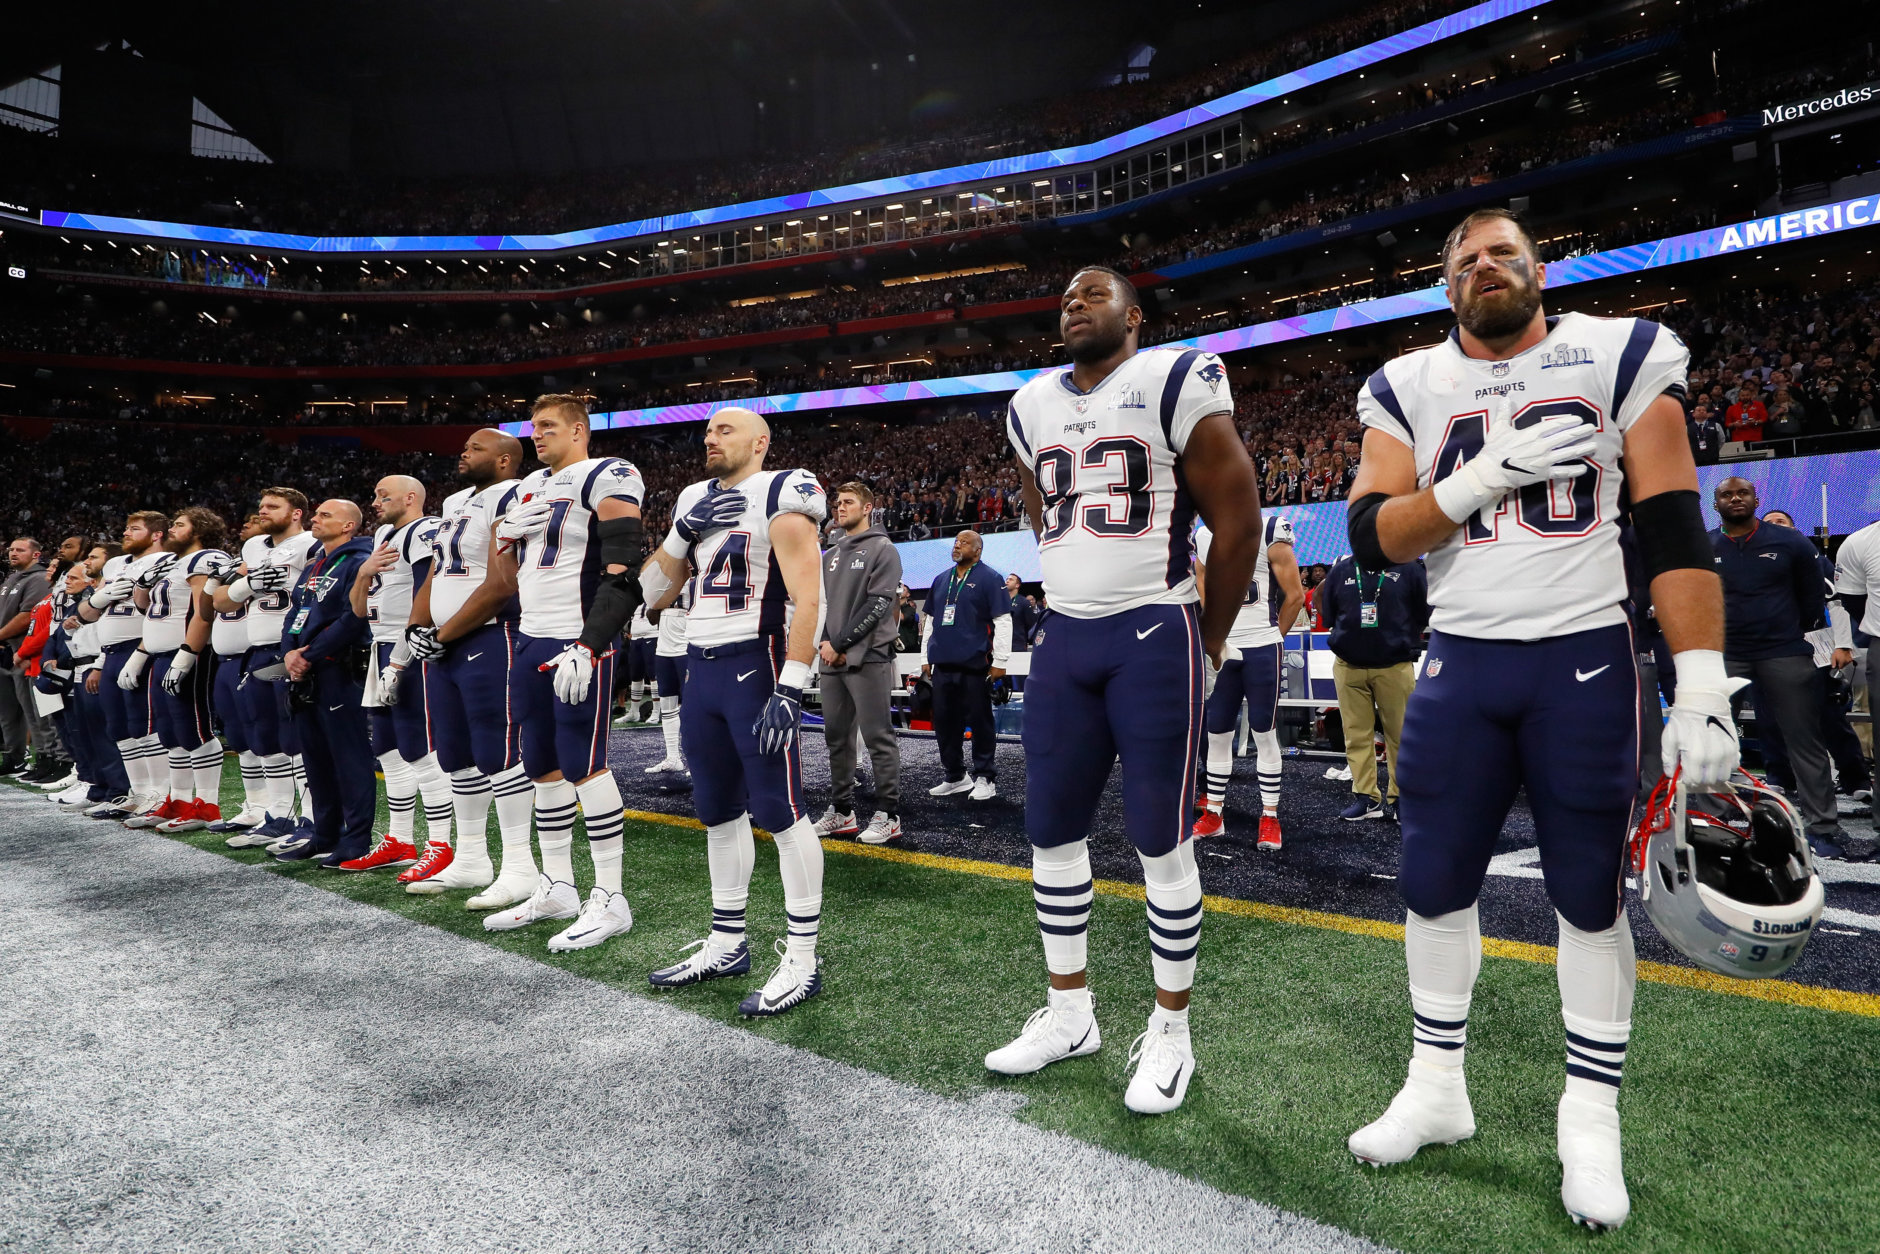 ATLANTA, GA - FEBRUARY 03: The New England Patriots look on during the singing of the National Anthem during Super Bowl LIII at Mercedes-Benz Stadium on February 3, 2019 in Atlanta, Georgia.  (Photo by Kevin C. Cox/Getty Images)